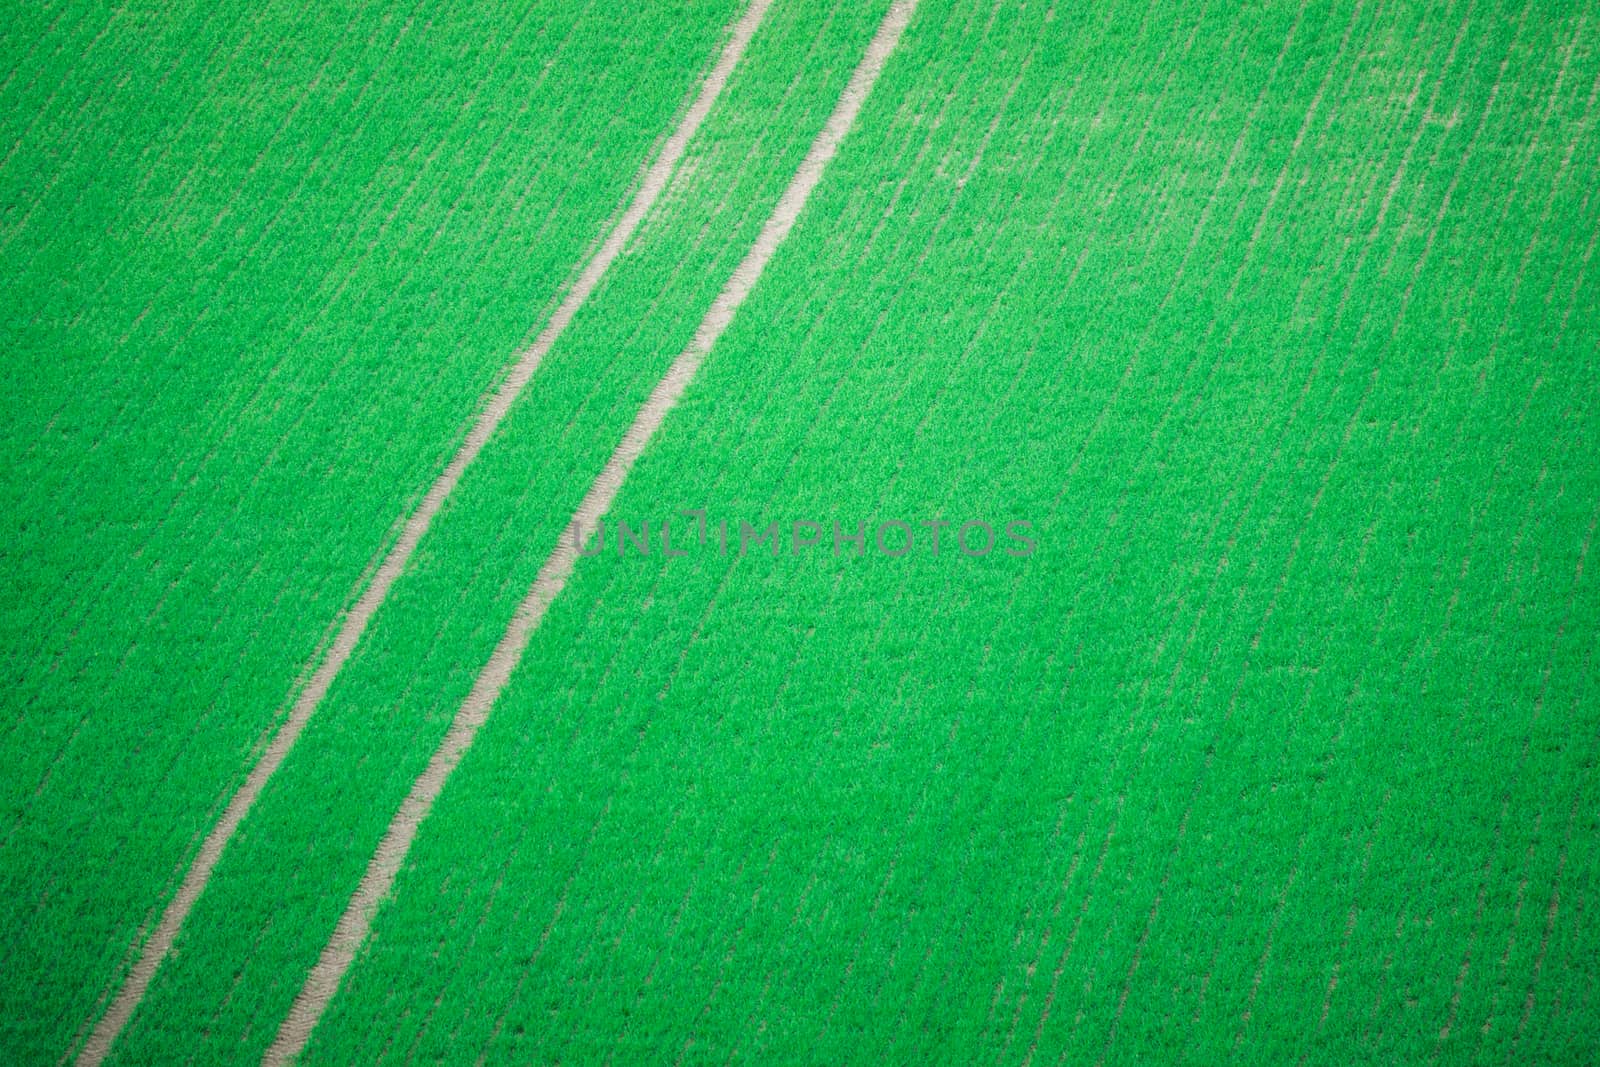 Tractor Tracks Through Crops by mrdoomits